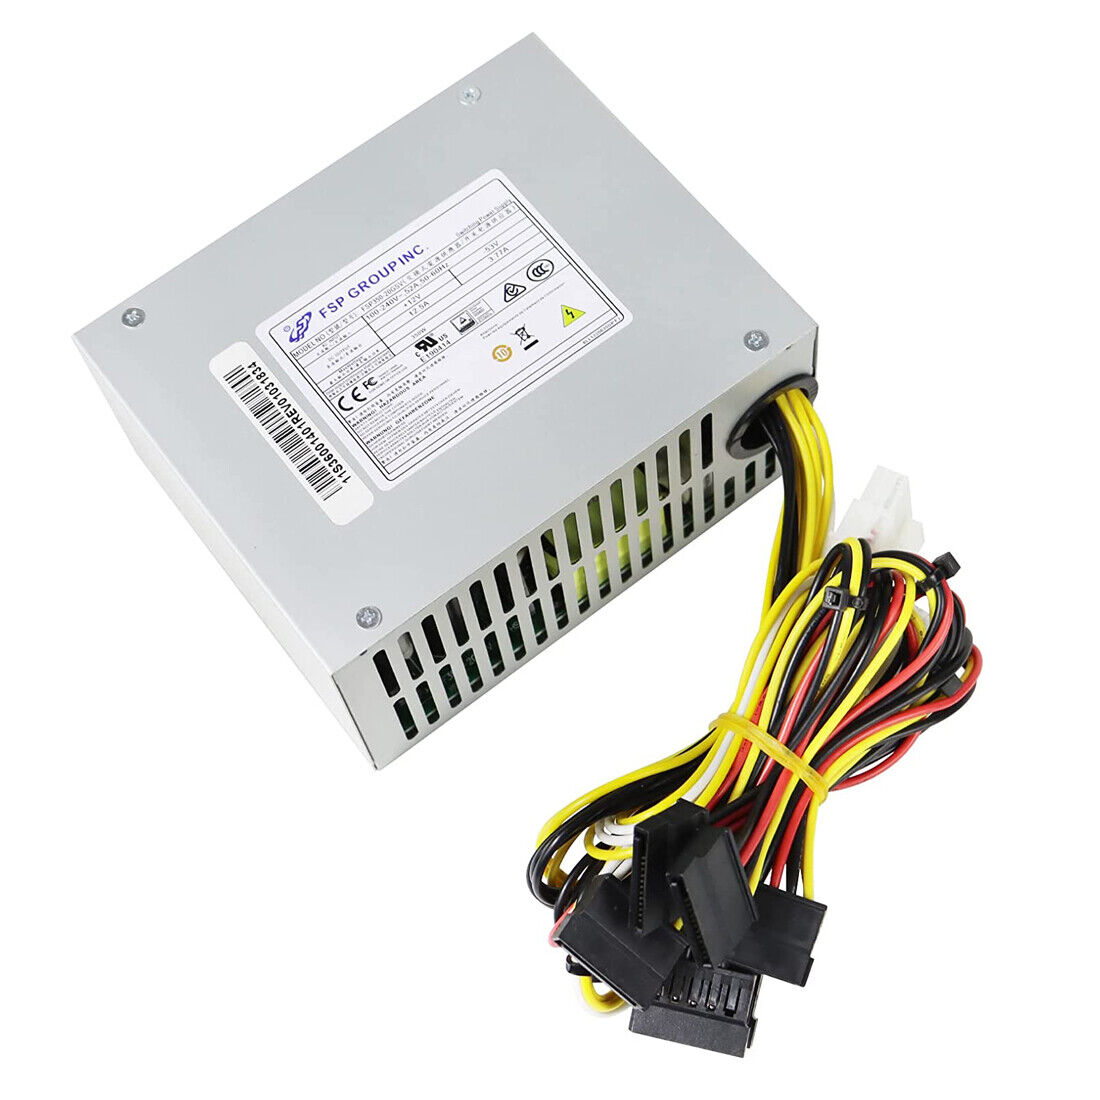 New 350W Power Supply For FSP FSP350-20GSV DPS-300AB-81B DPS-300AB-81 7916NP US